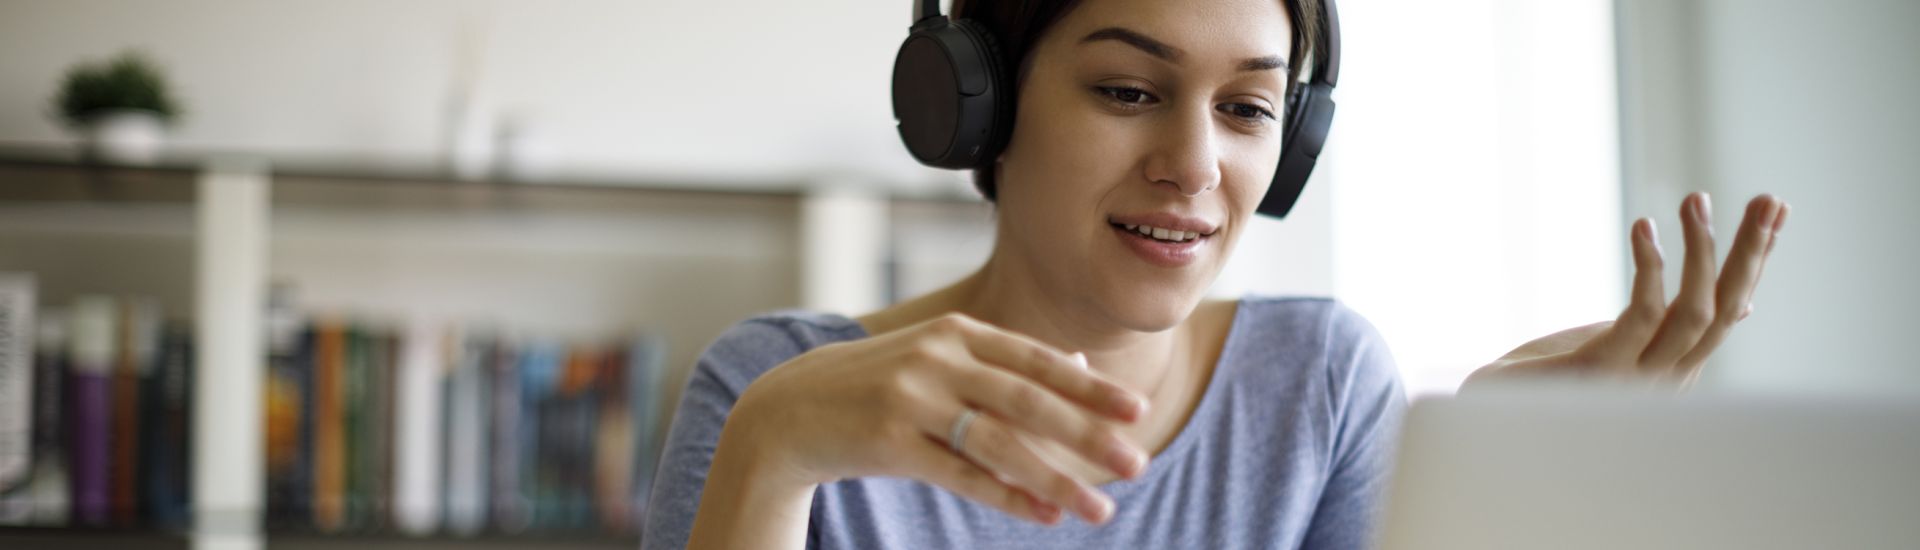 woman wearing headphones sitting in front of a laptop gesturing with her hands